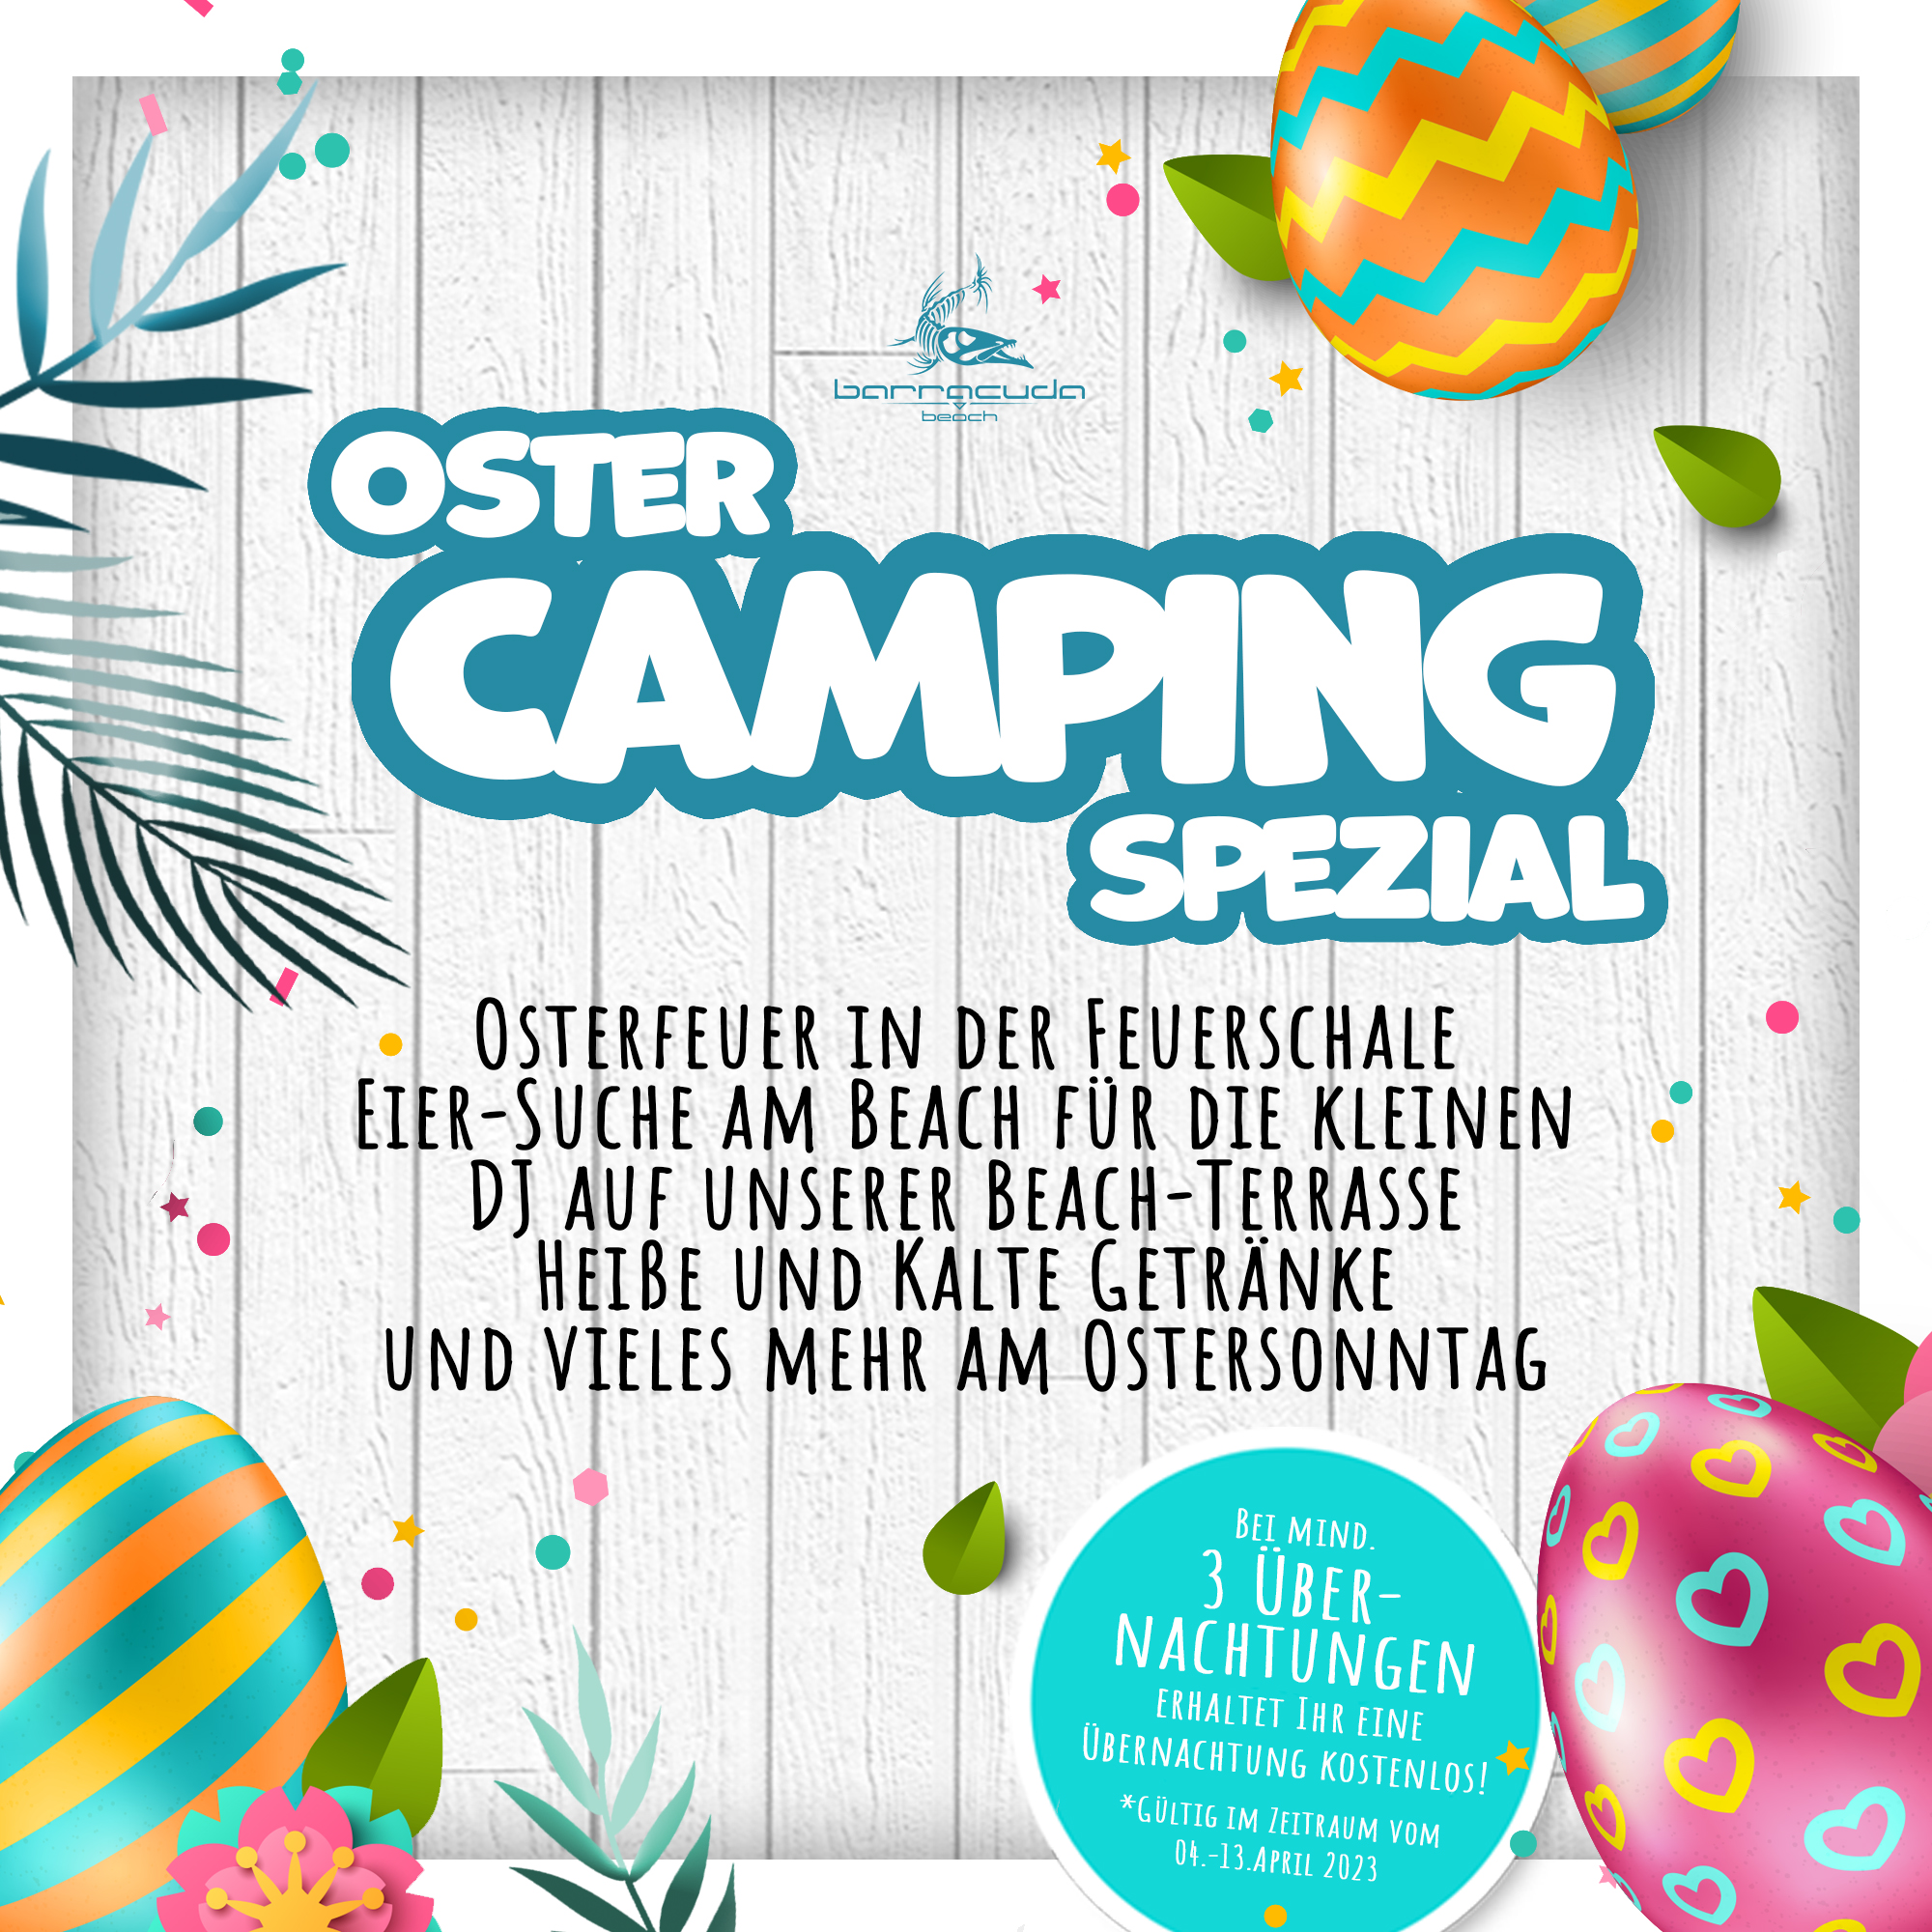 Oster Camping Spezial